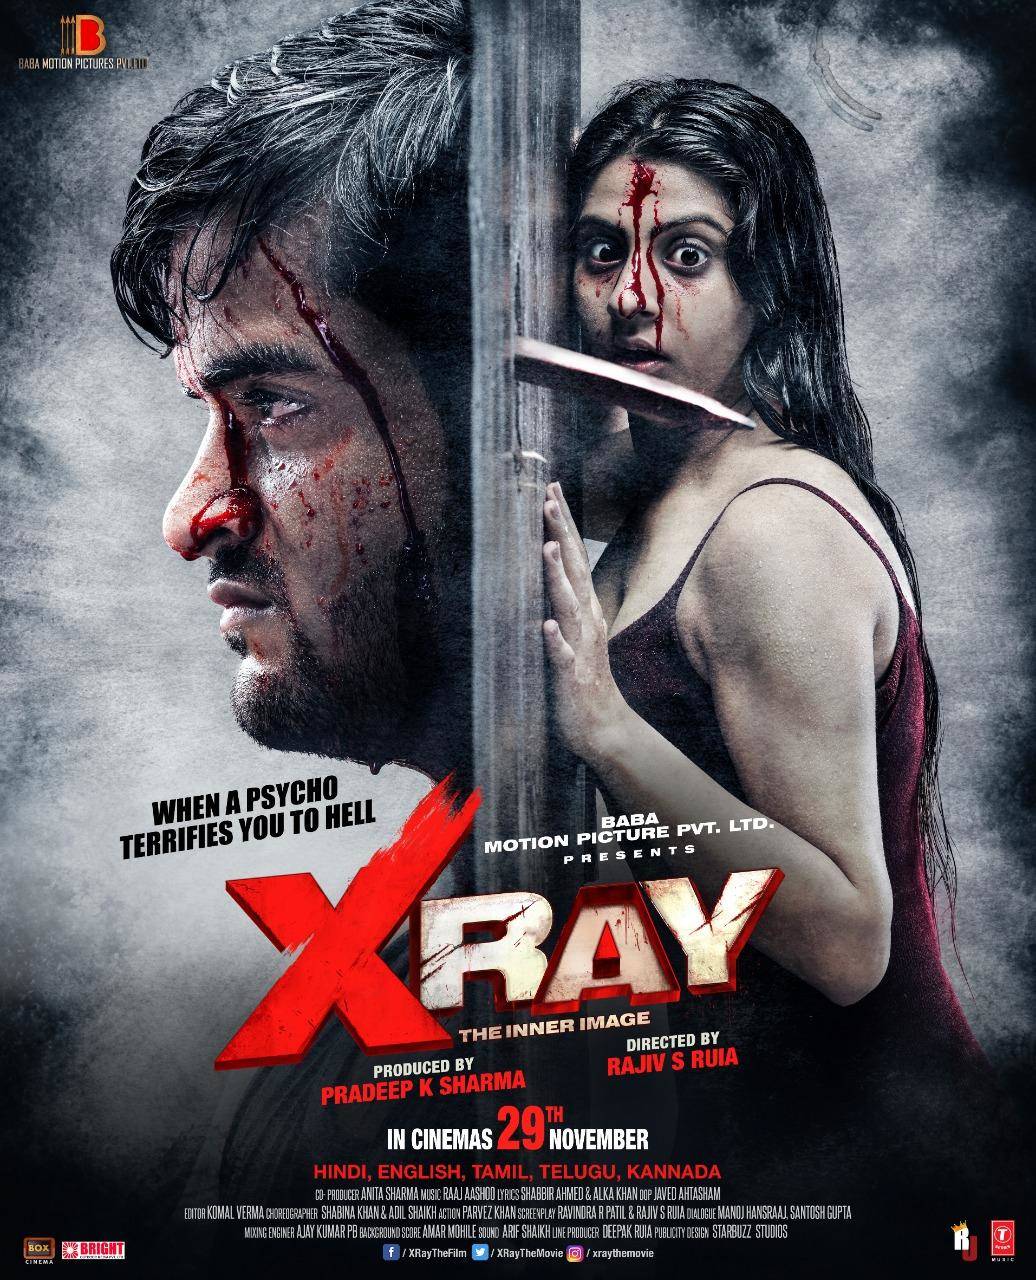 Rajiv Ruia Is Back With A Bang – X Ray: The Inner Image Movie Review Rating: 3 Stars